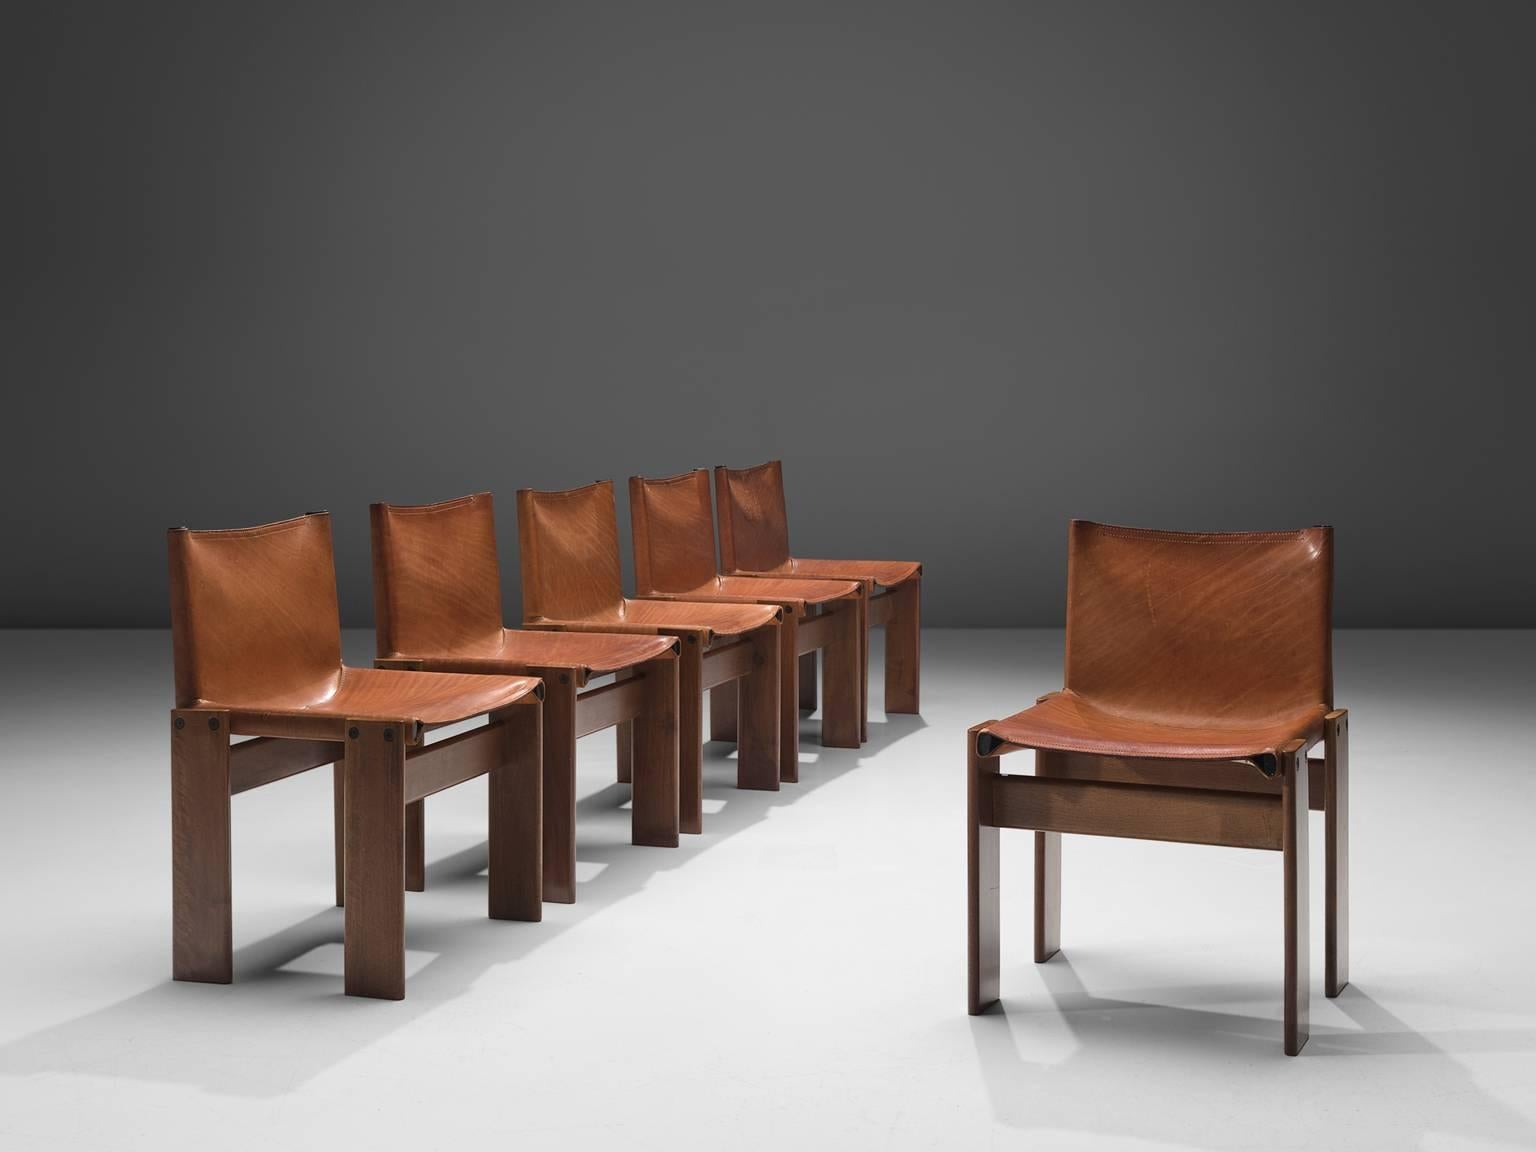 Afra & Tobia Scarpa, six monk dining chairs, wood and patinated cognac leather, Italy, 1974.

The wonderfully patinated cognac leather forms a striking combination with the dark walnut wood. Interesting is the 'flat' shape of this chair where the